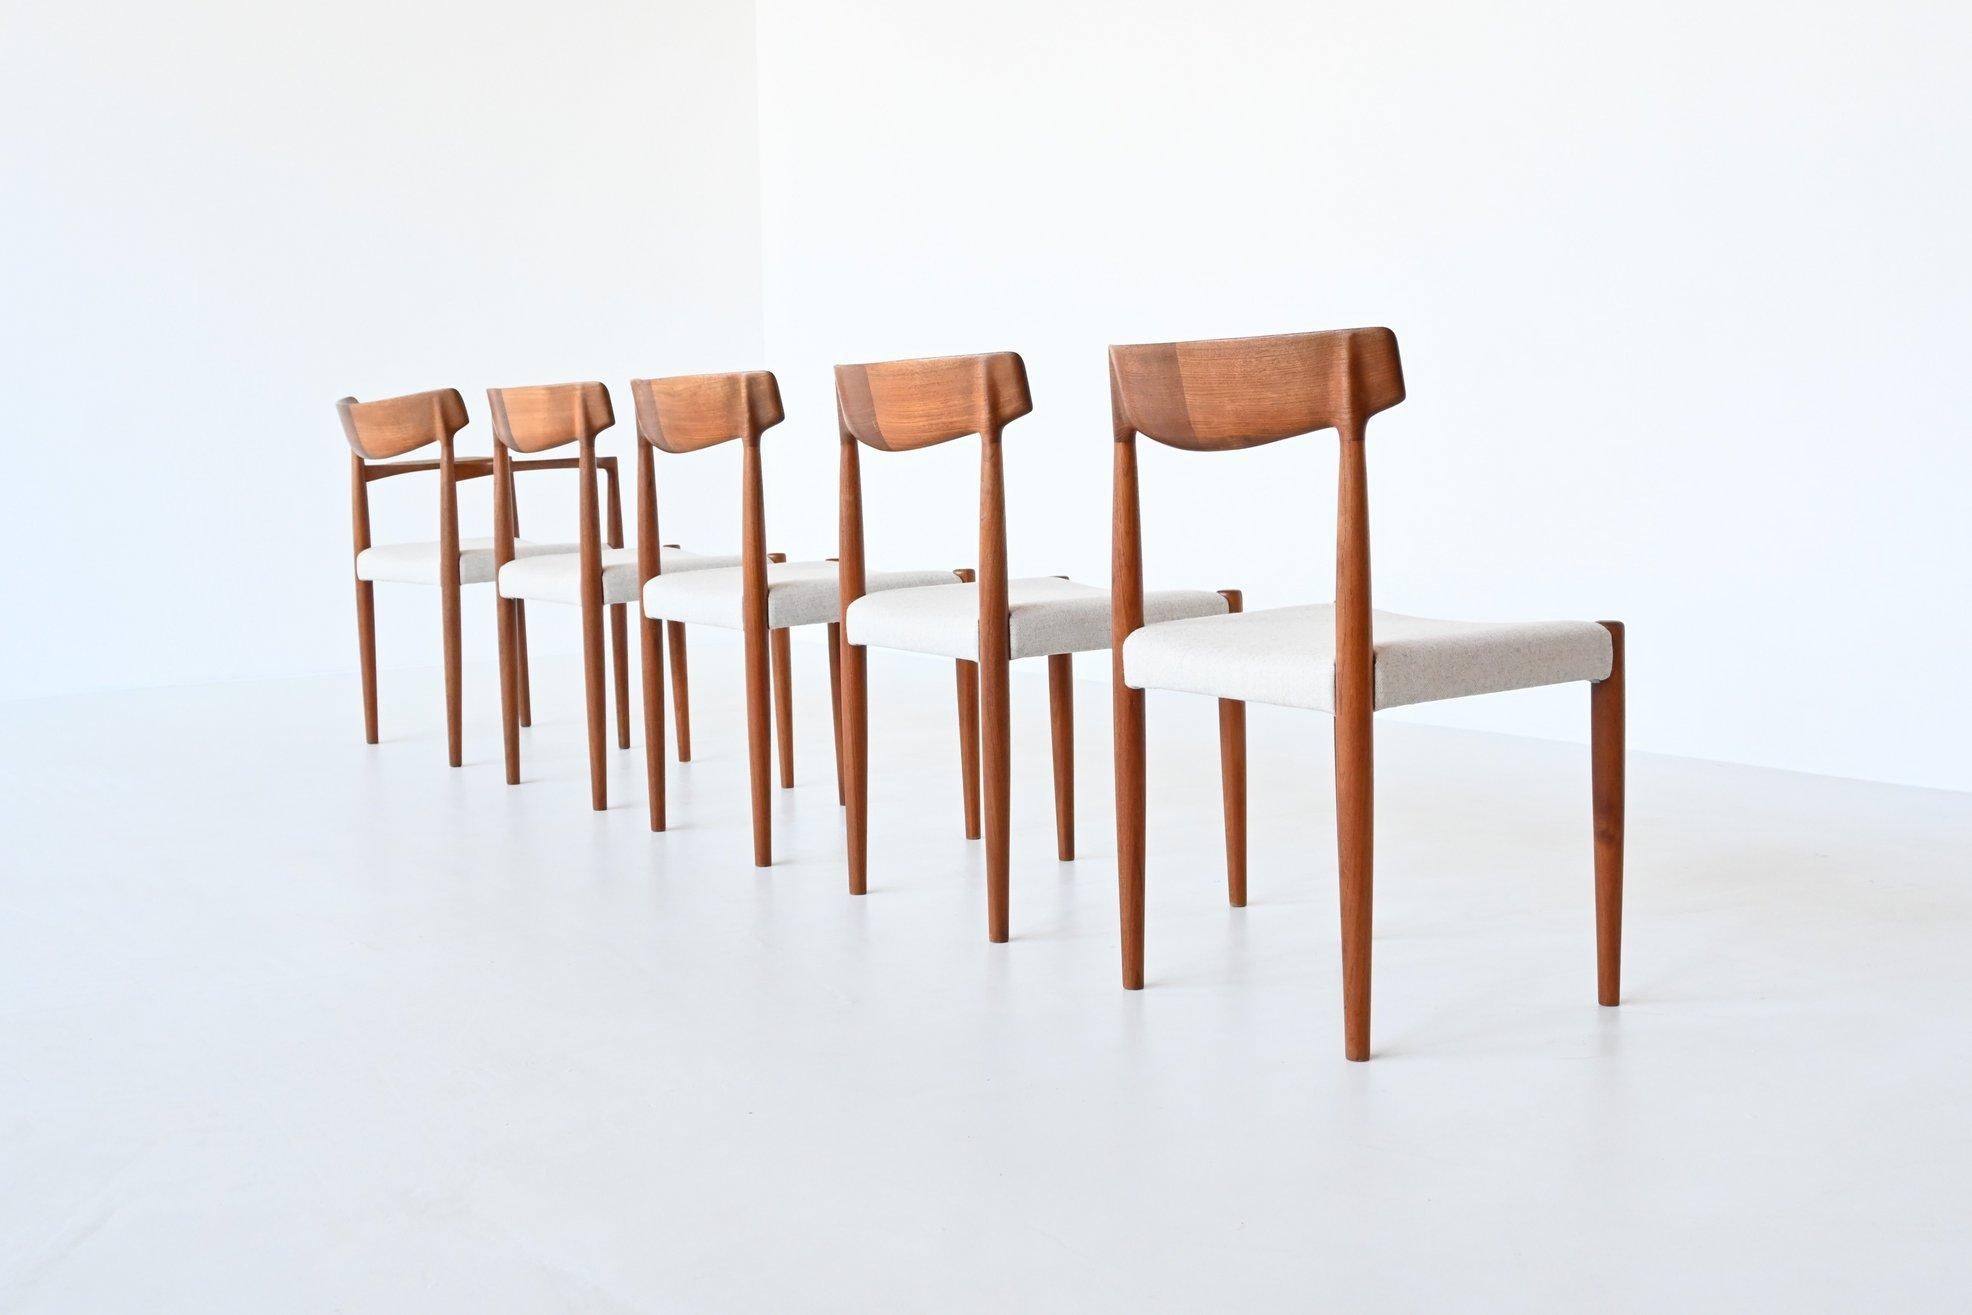 Beautiful shaped and well-crafted set of five dining chairs model 343 designed by Knud Faerch and manufactured by Slagelse Mobelfabrik, Denmark 1960. The set consists of four chairs without armrests and one chair with armrests. The frames are made